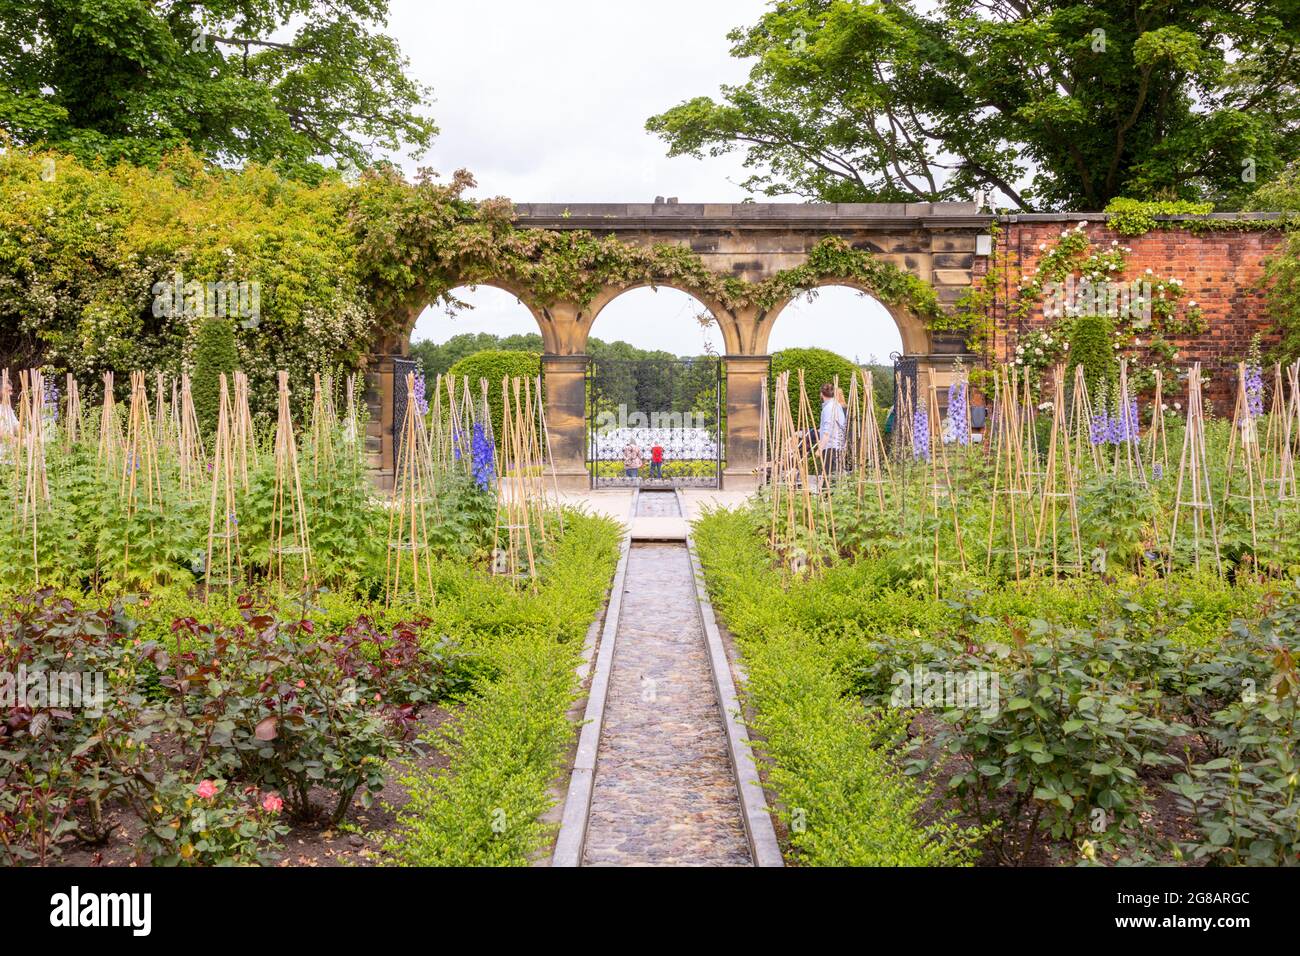 Formal garden plants and brick arches, Alnwick Gardens, Northumberland, UK Stock Photo